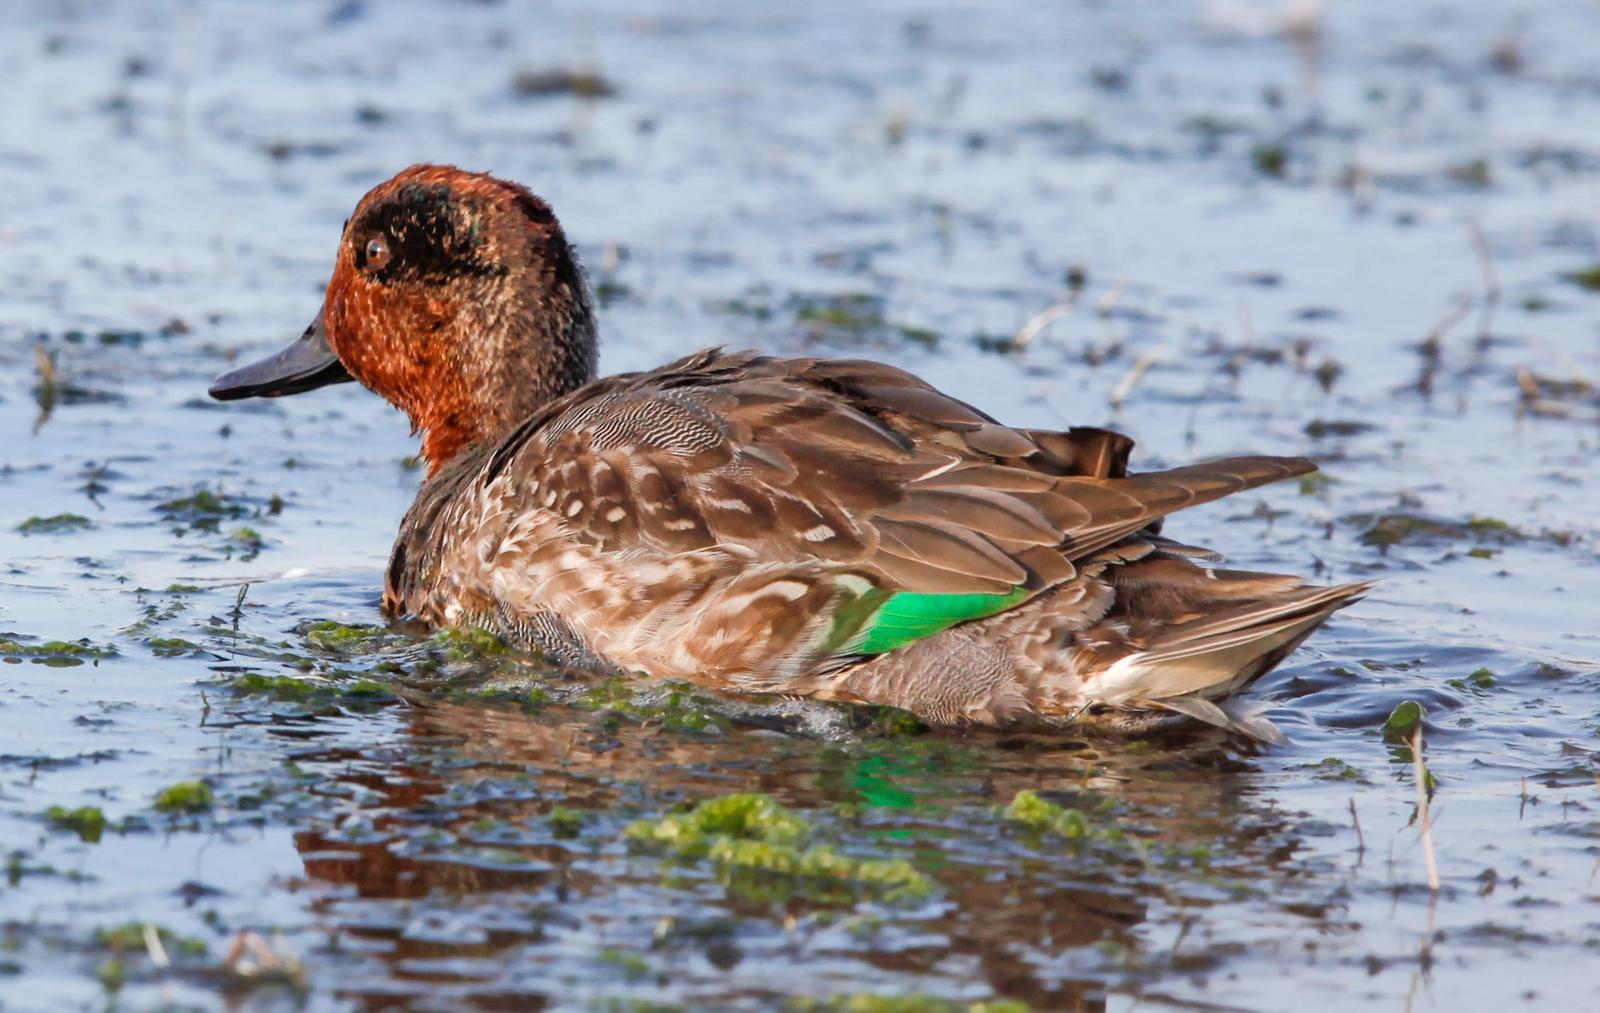 Green-winged Teal Photo by Lucy Wightman